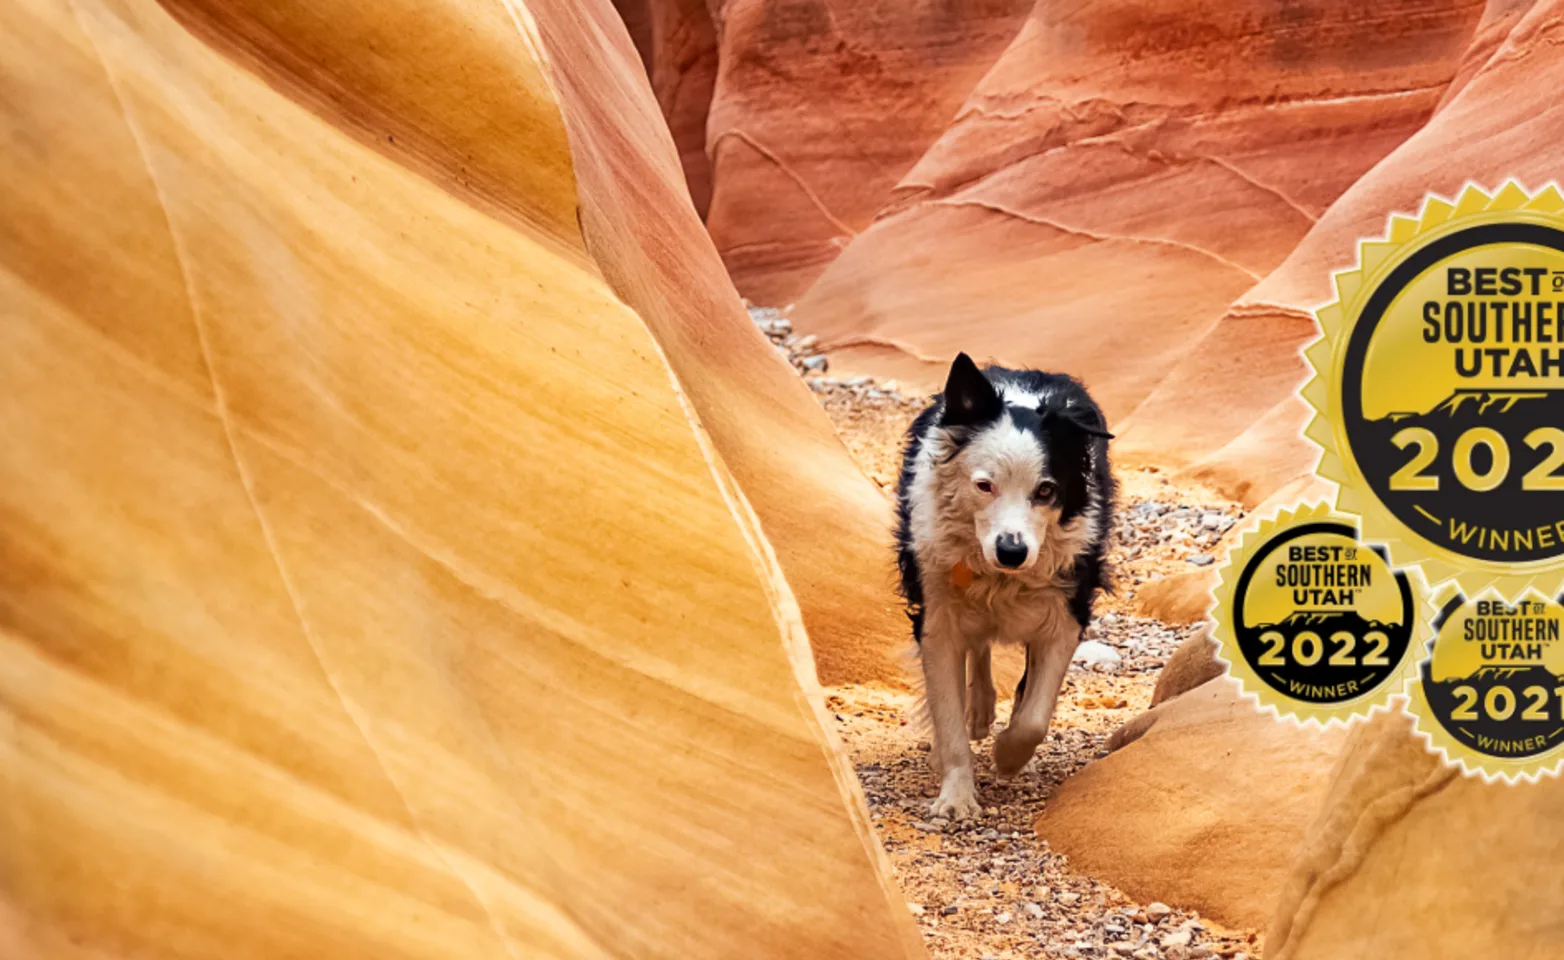 Dog walking through a narrow slot canyon with the Best Vet in Southern Utah Award icon on the right